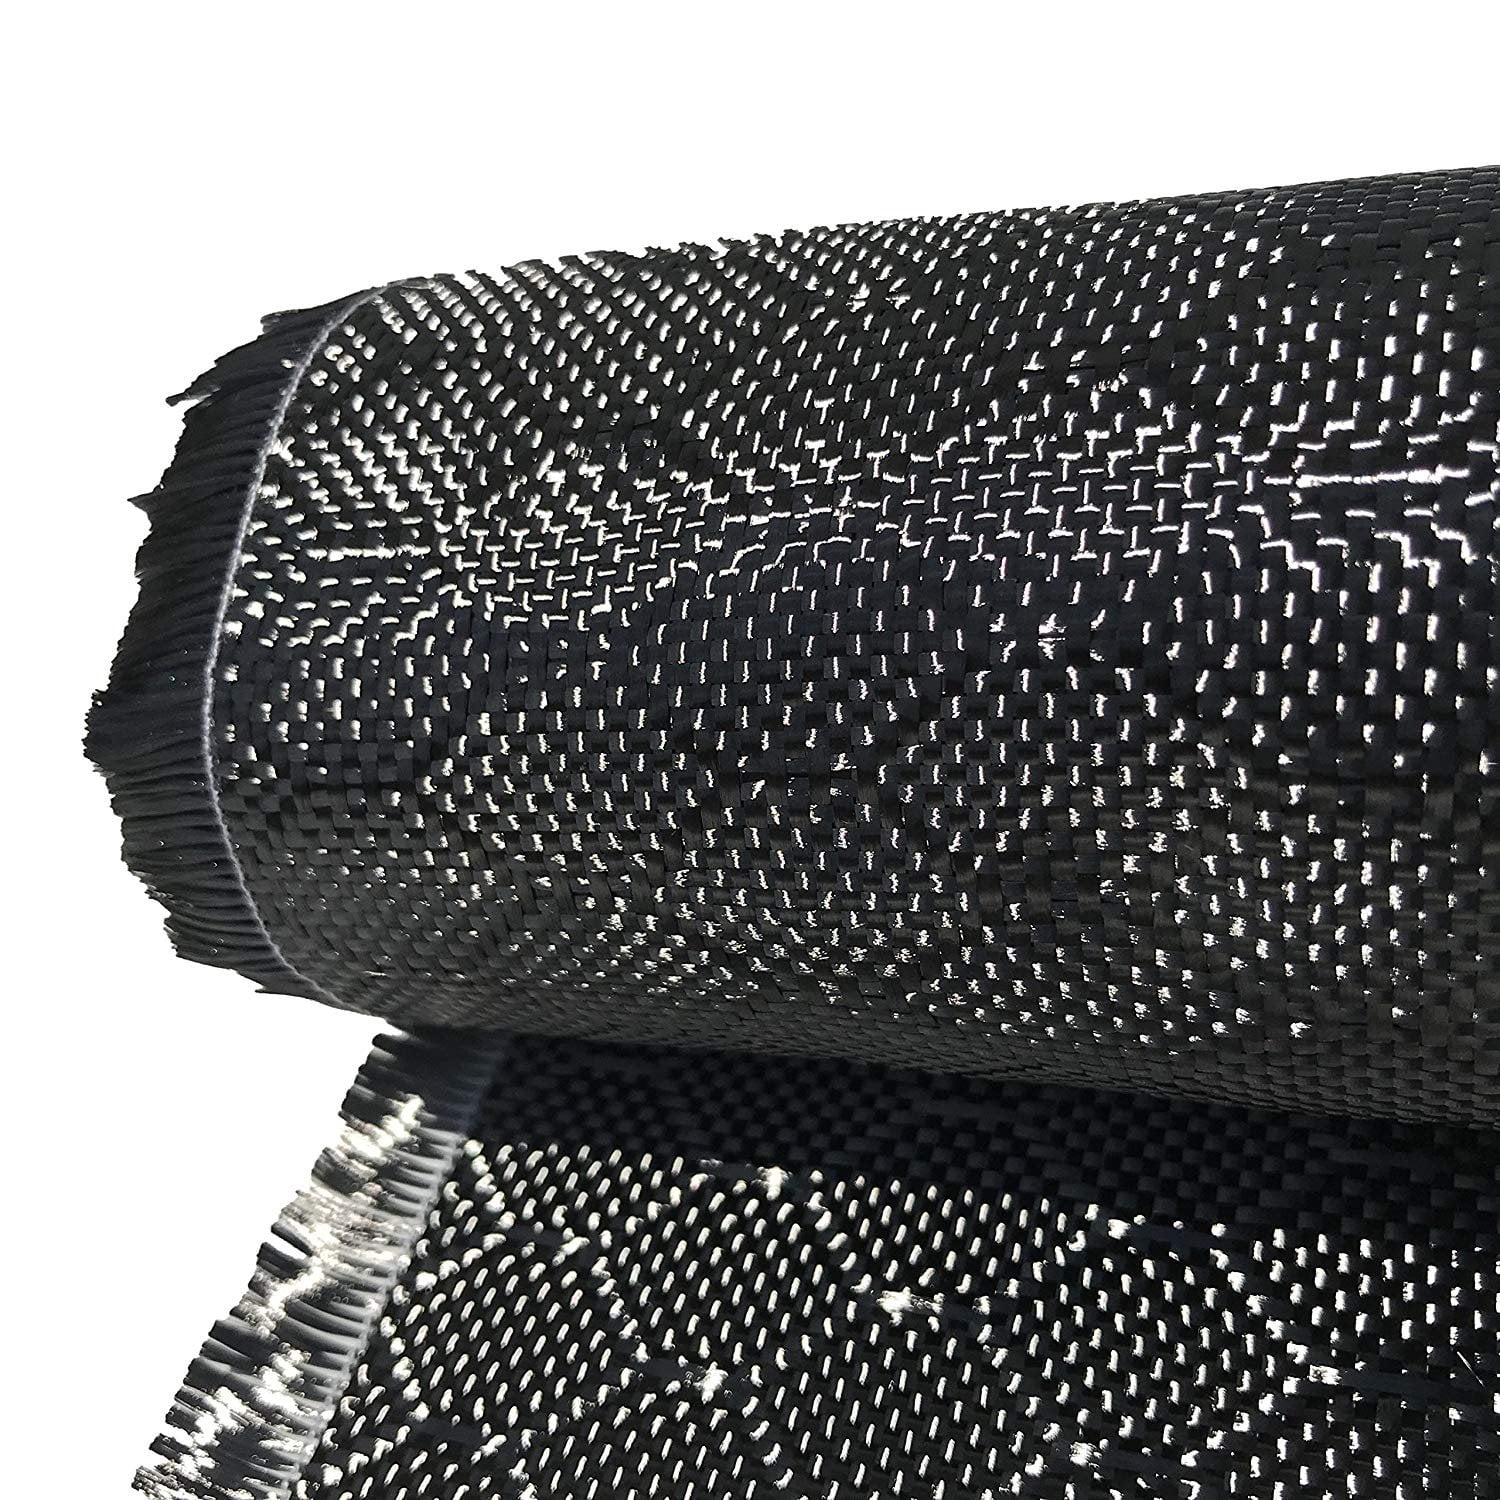 12 in x 1 FT 220g-Black Wasp Weave-3K WASP Carbon Fiber Fabric